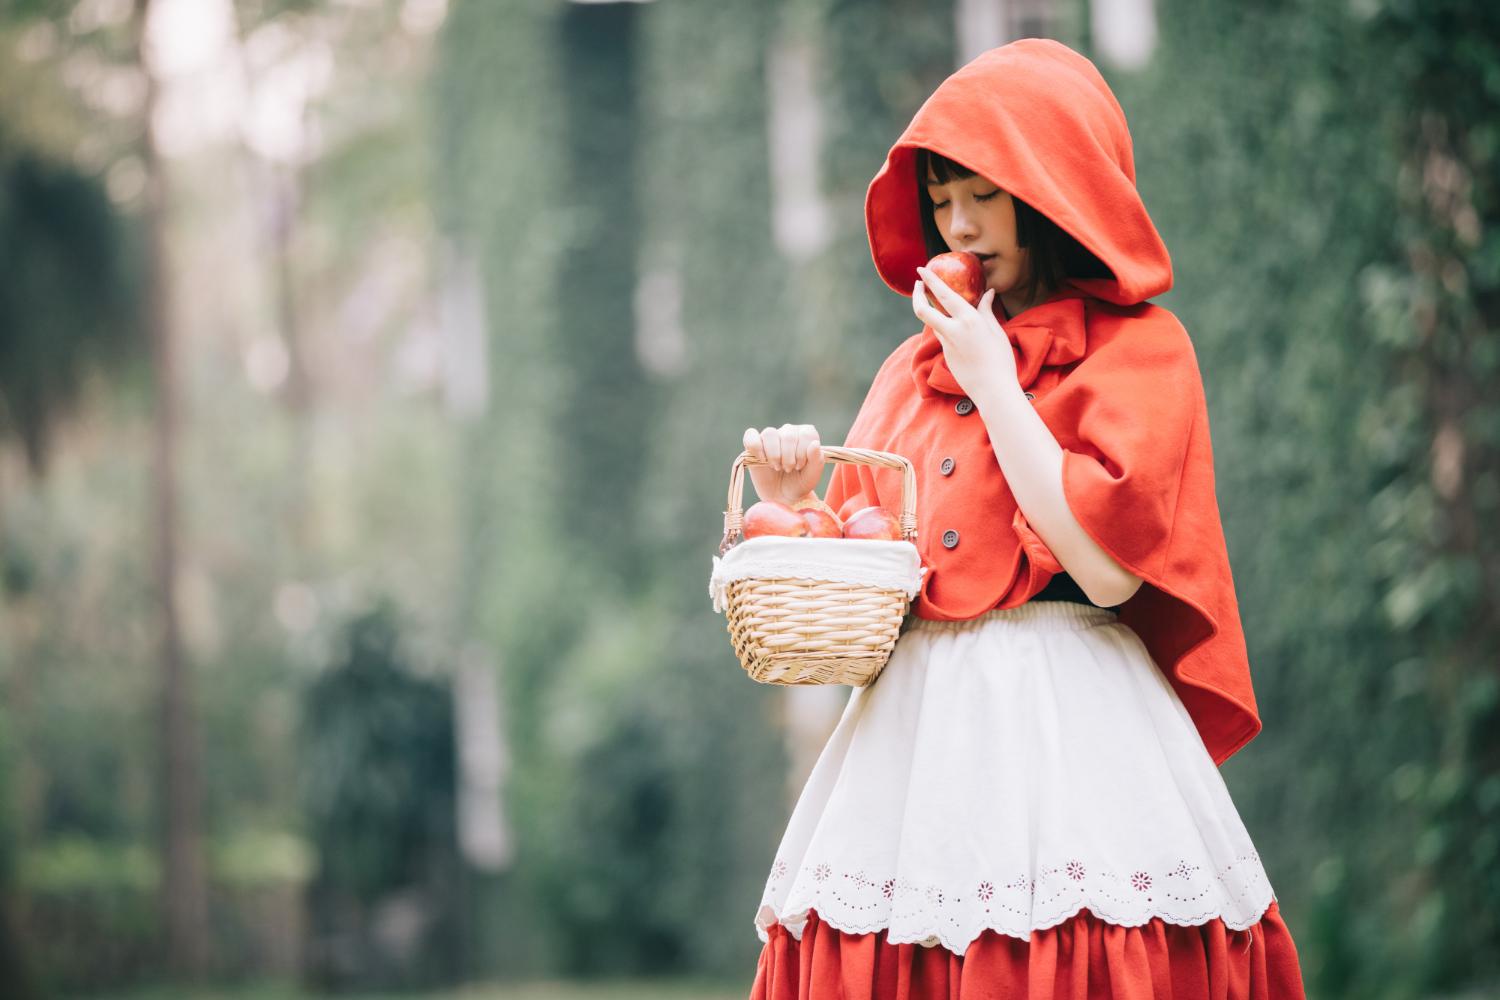 young Asian woman with little red riding hood clothes feeling safe or in danger